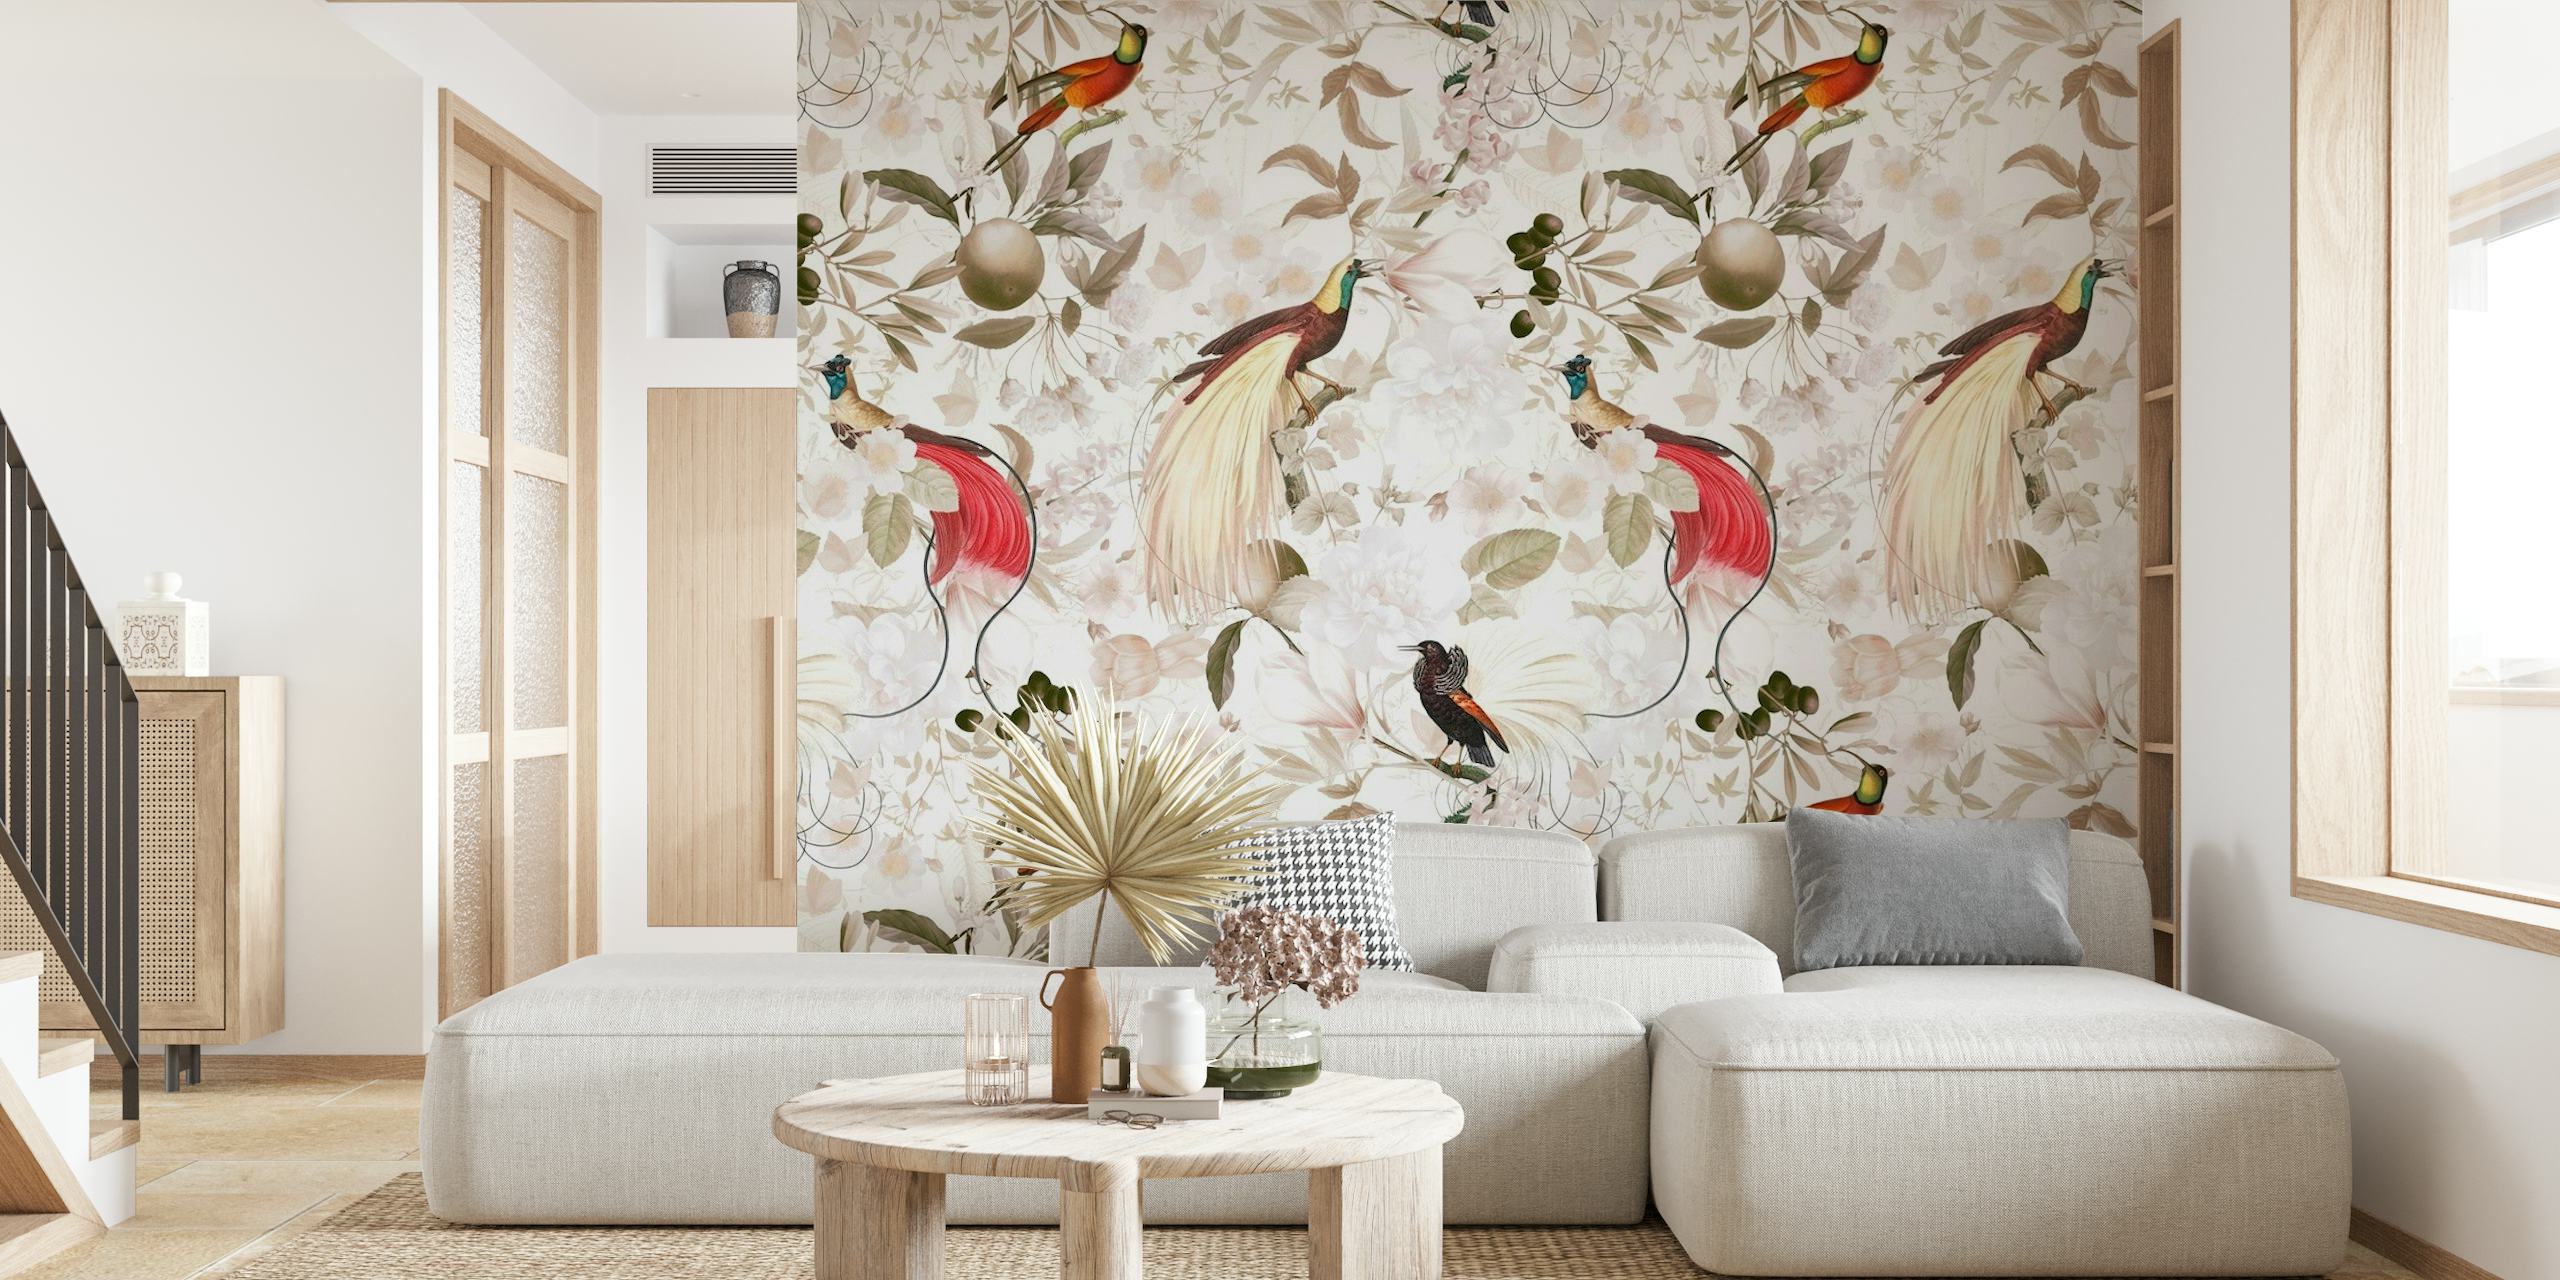 Wall mural with colorful paradise birds in a vintage jungle setting